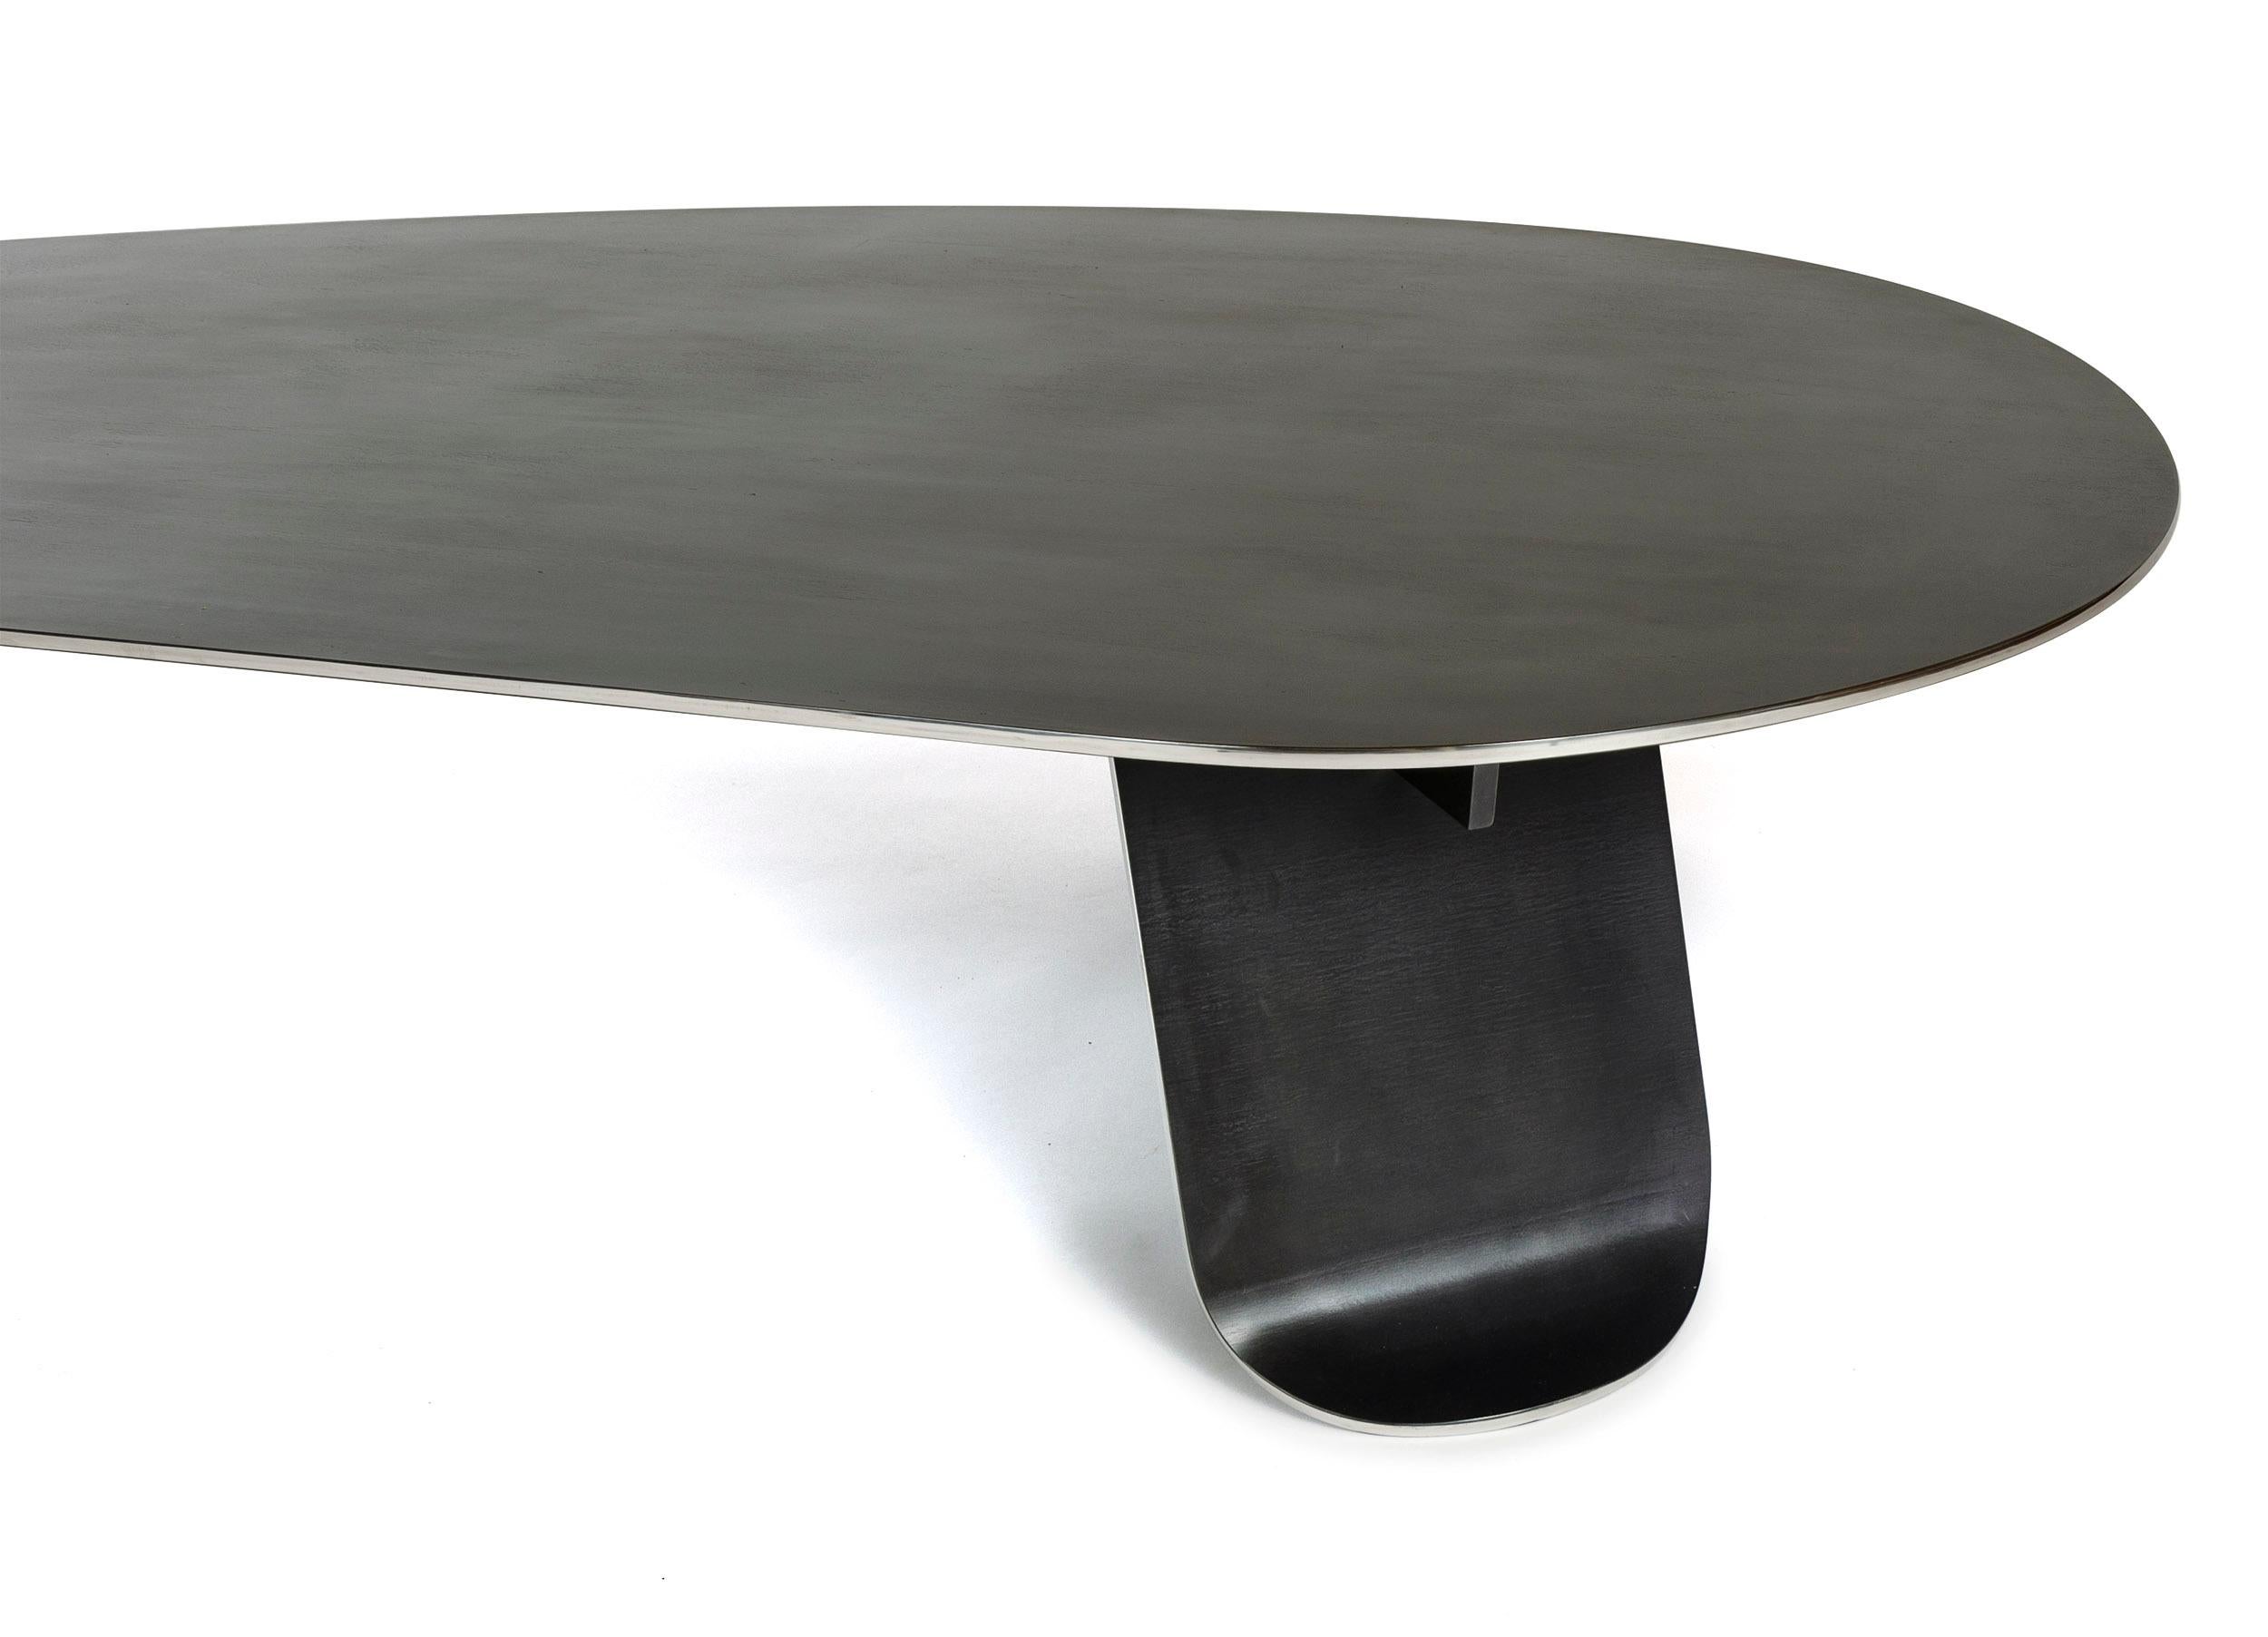 Wyeth Chrysalis Table No. 1 in Blackened Stainless Steel with Polished Edges For Sale 7